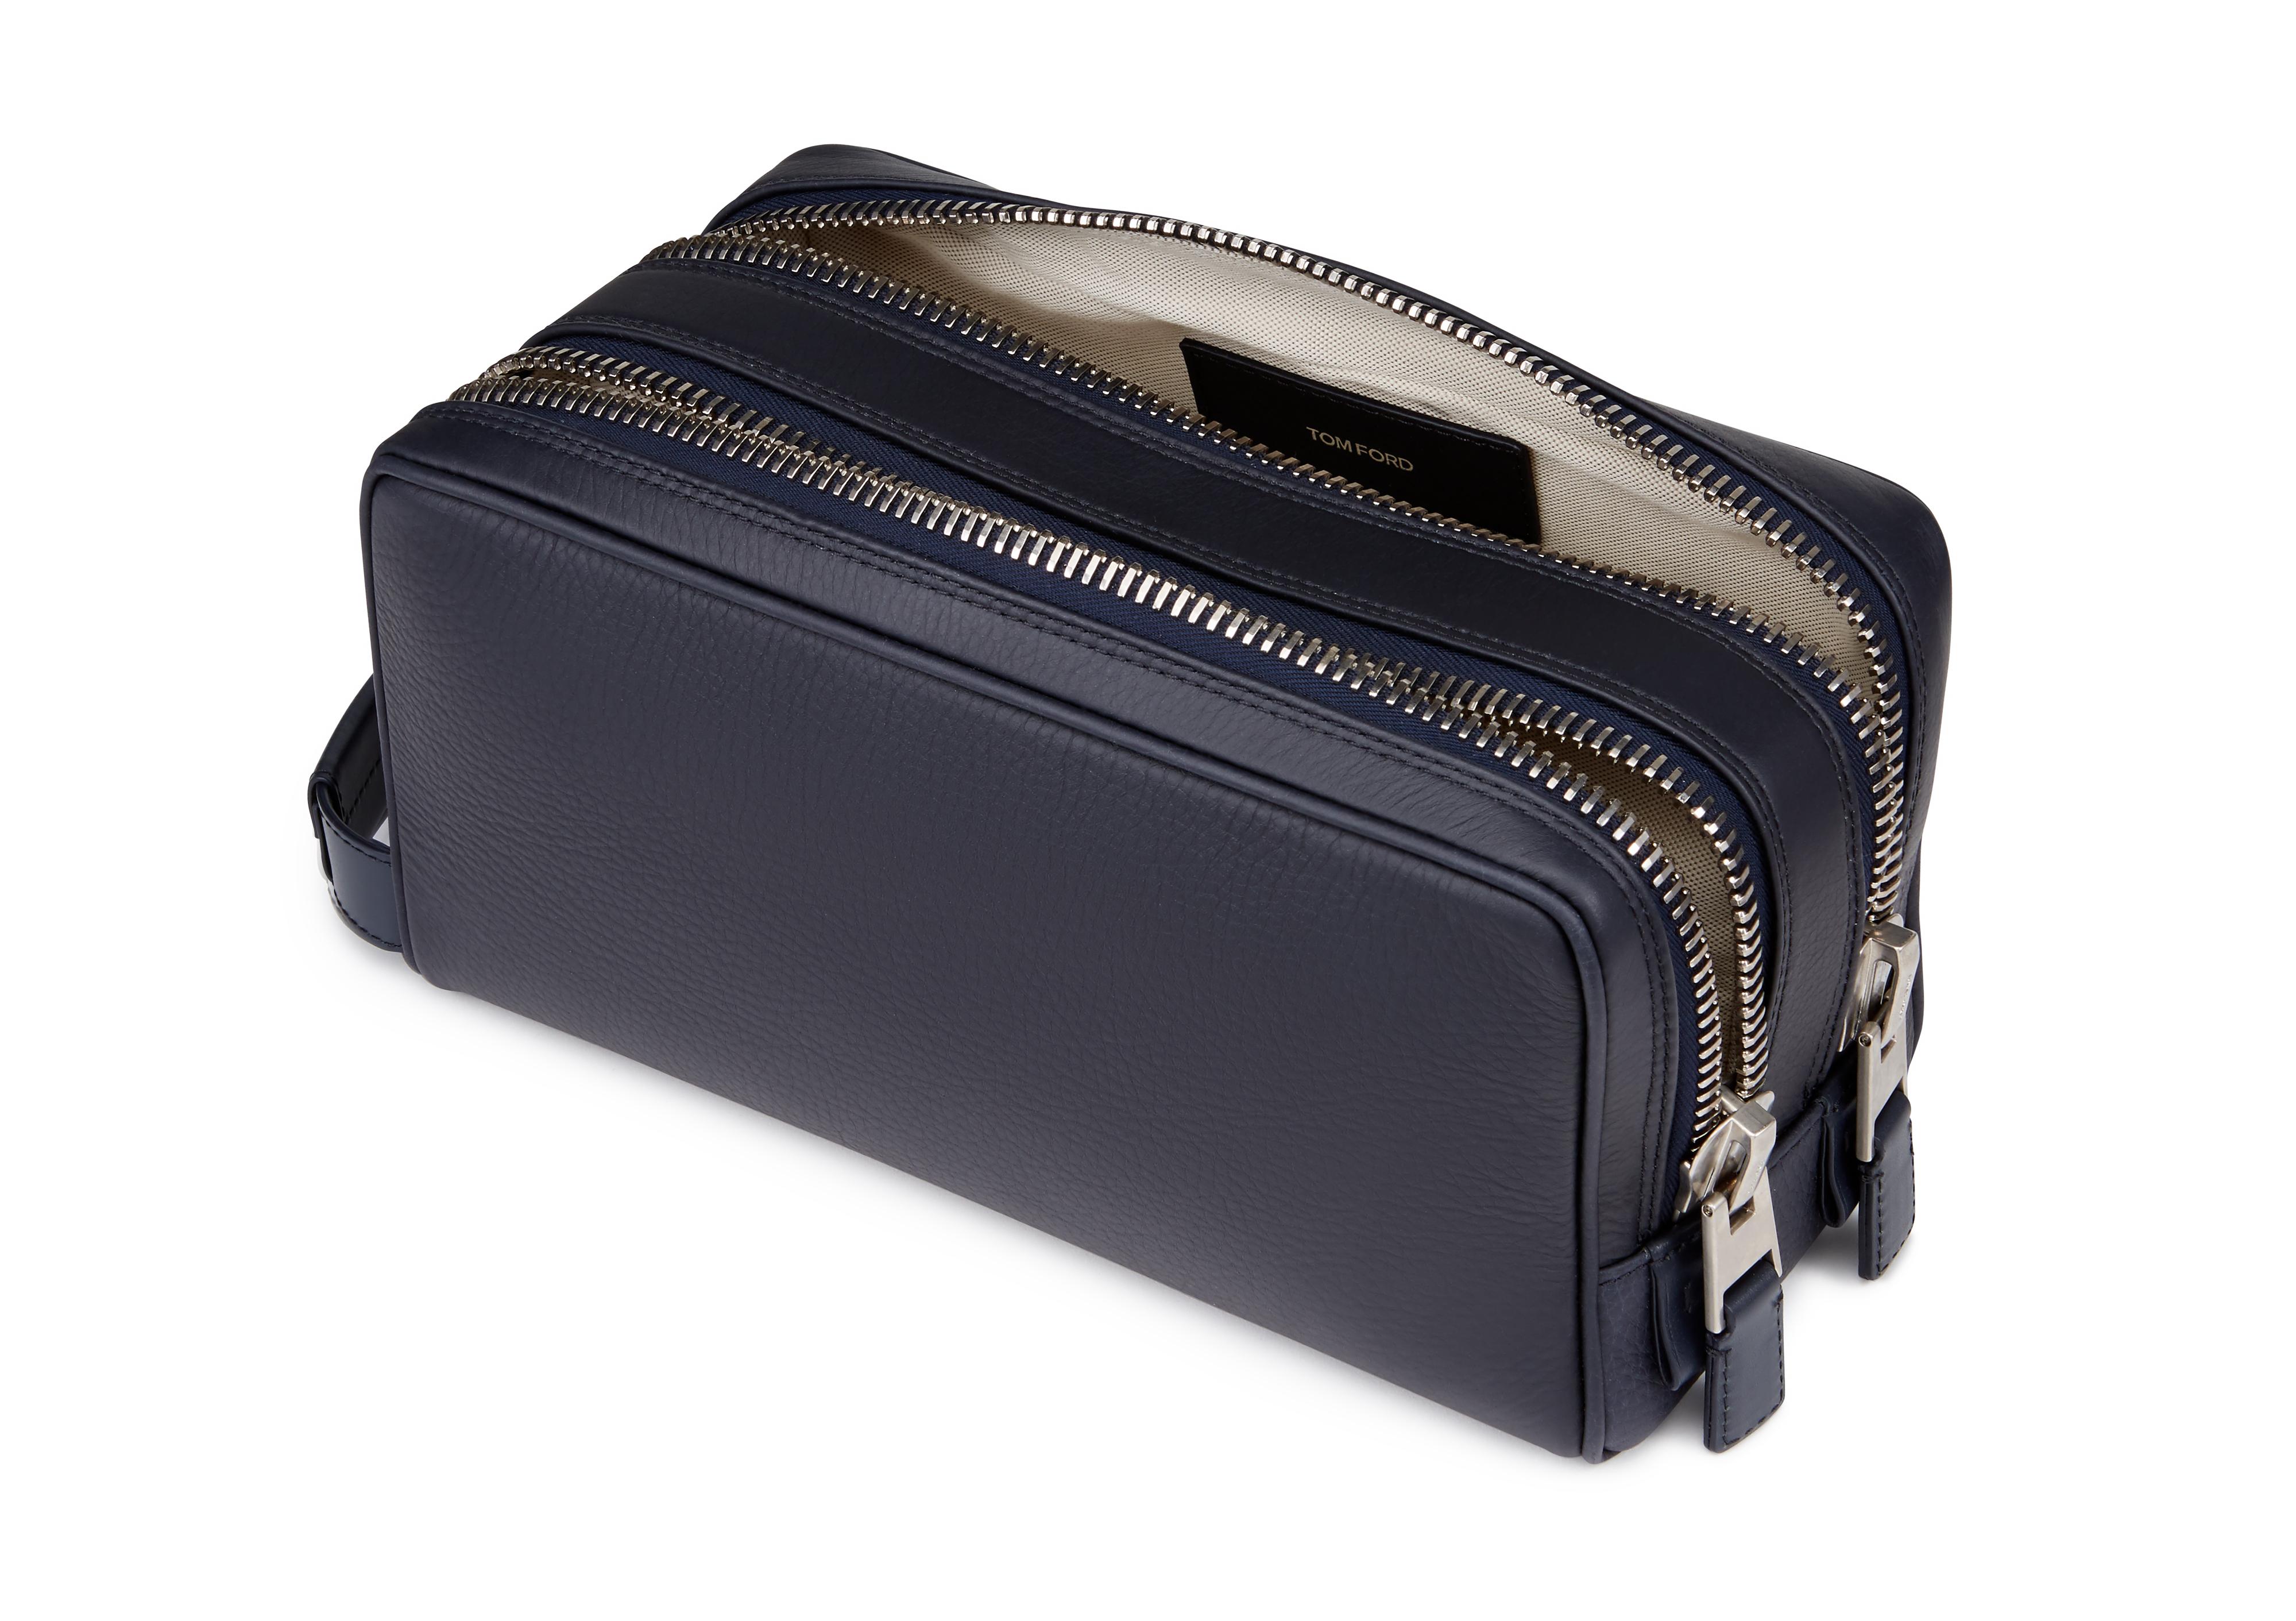 Tom Ford Leather Toiletry Bag - Brown Toiletry Bags, Bags